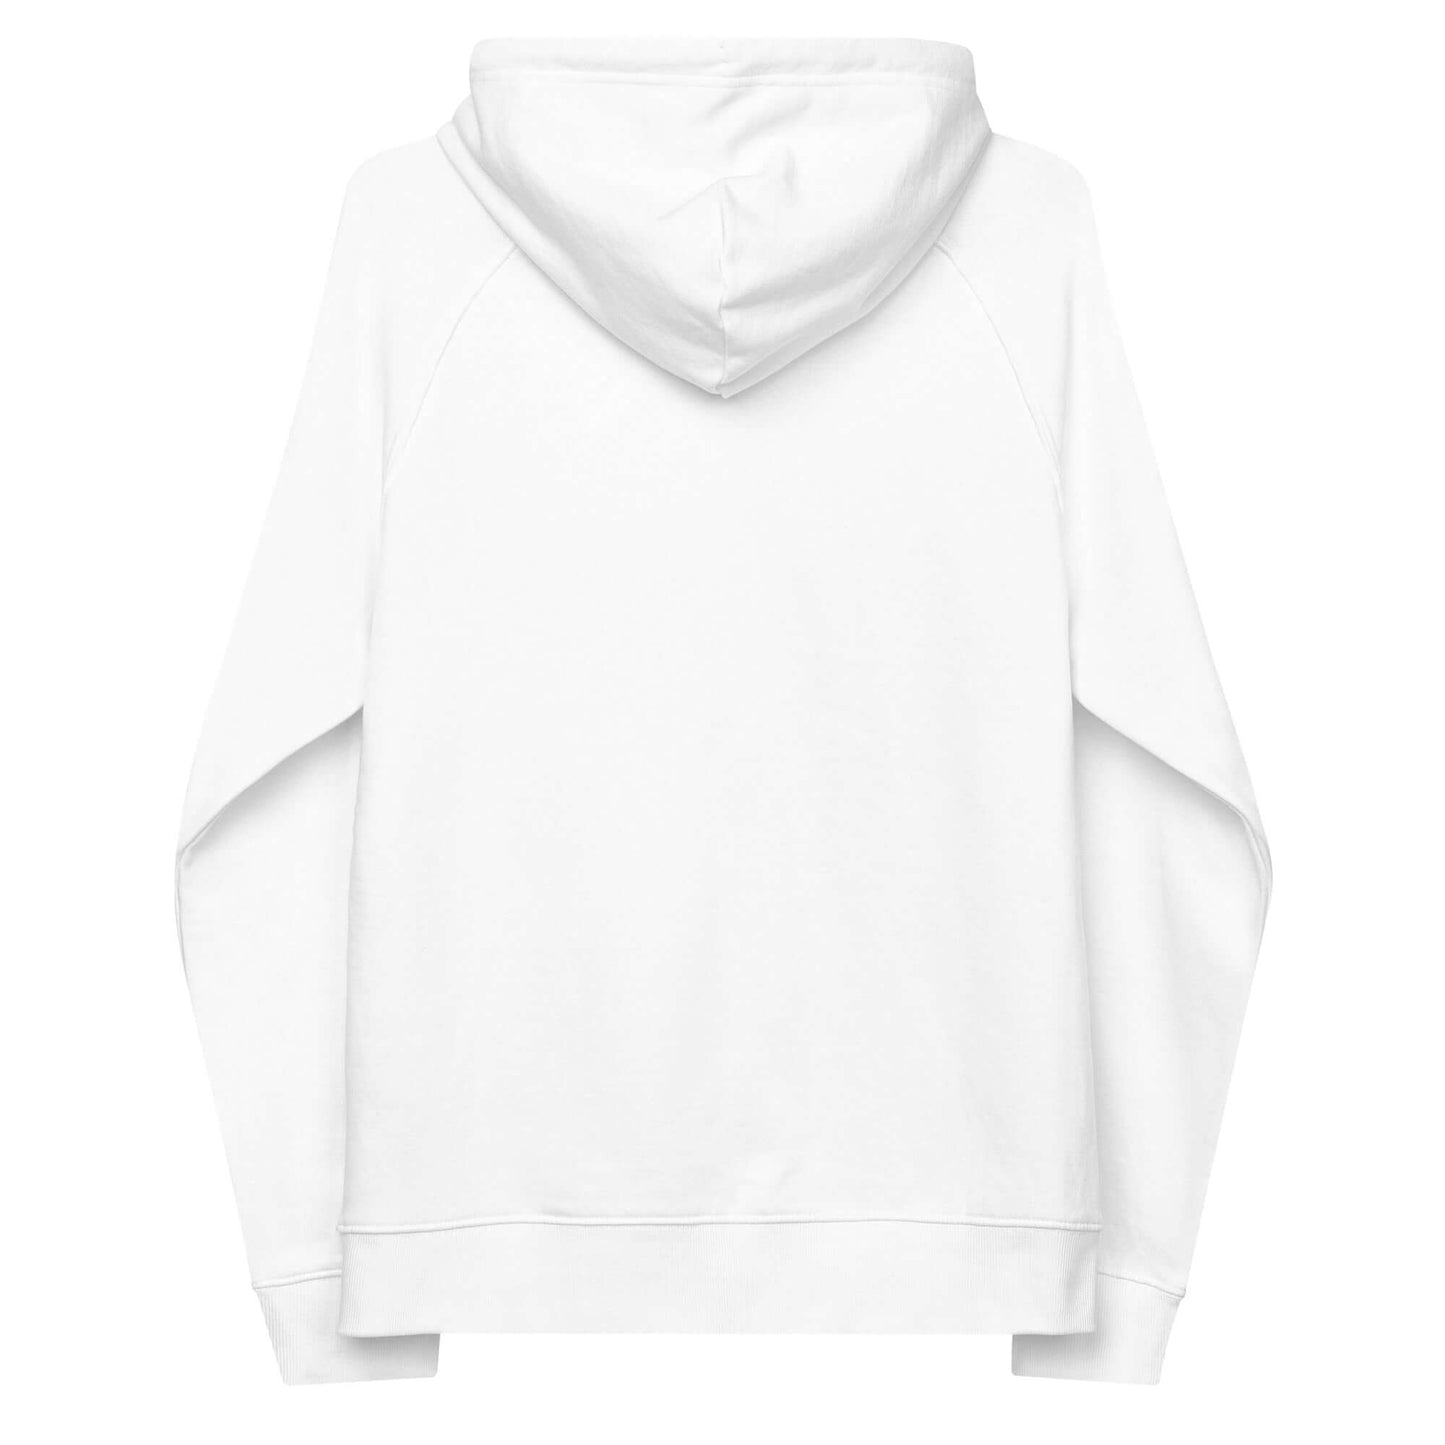 How it Feels to Know - Embroidery Unisex eco raglan hoodie